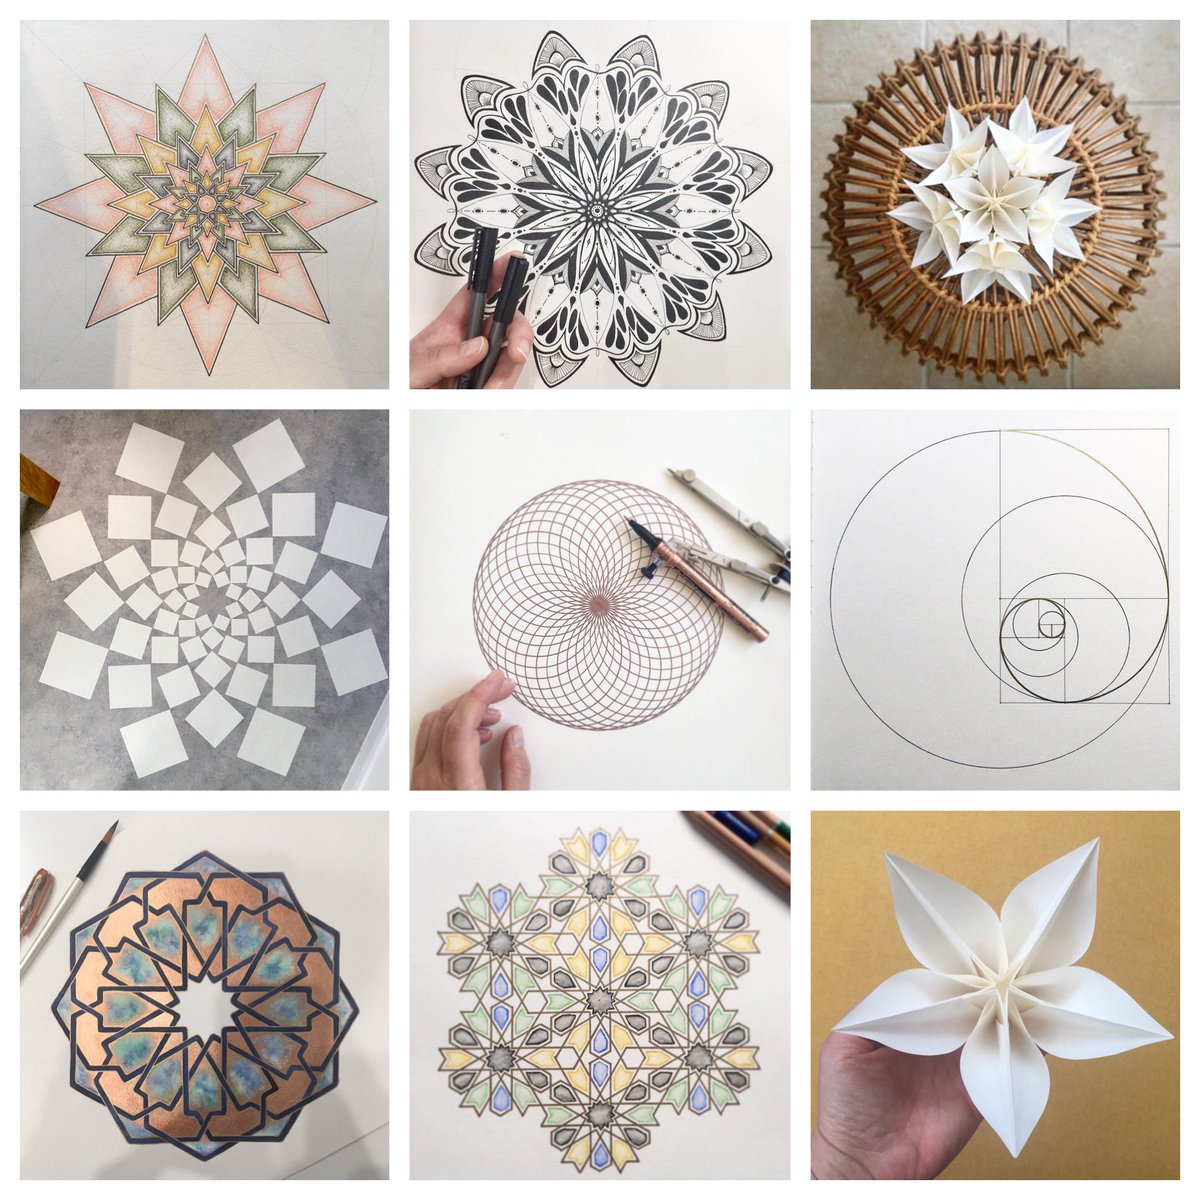 So, in an effort to be #10percentbraver, I’m thinking of offering an ‘Introduction to Geometric Art’ Zoom course this August!

More details in the next tweet - would anyone be interested? 

#IslamicGeometry #Mandalas #GothicRoseWindows #GoldenRatio #SacredGeometry